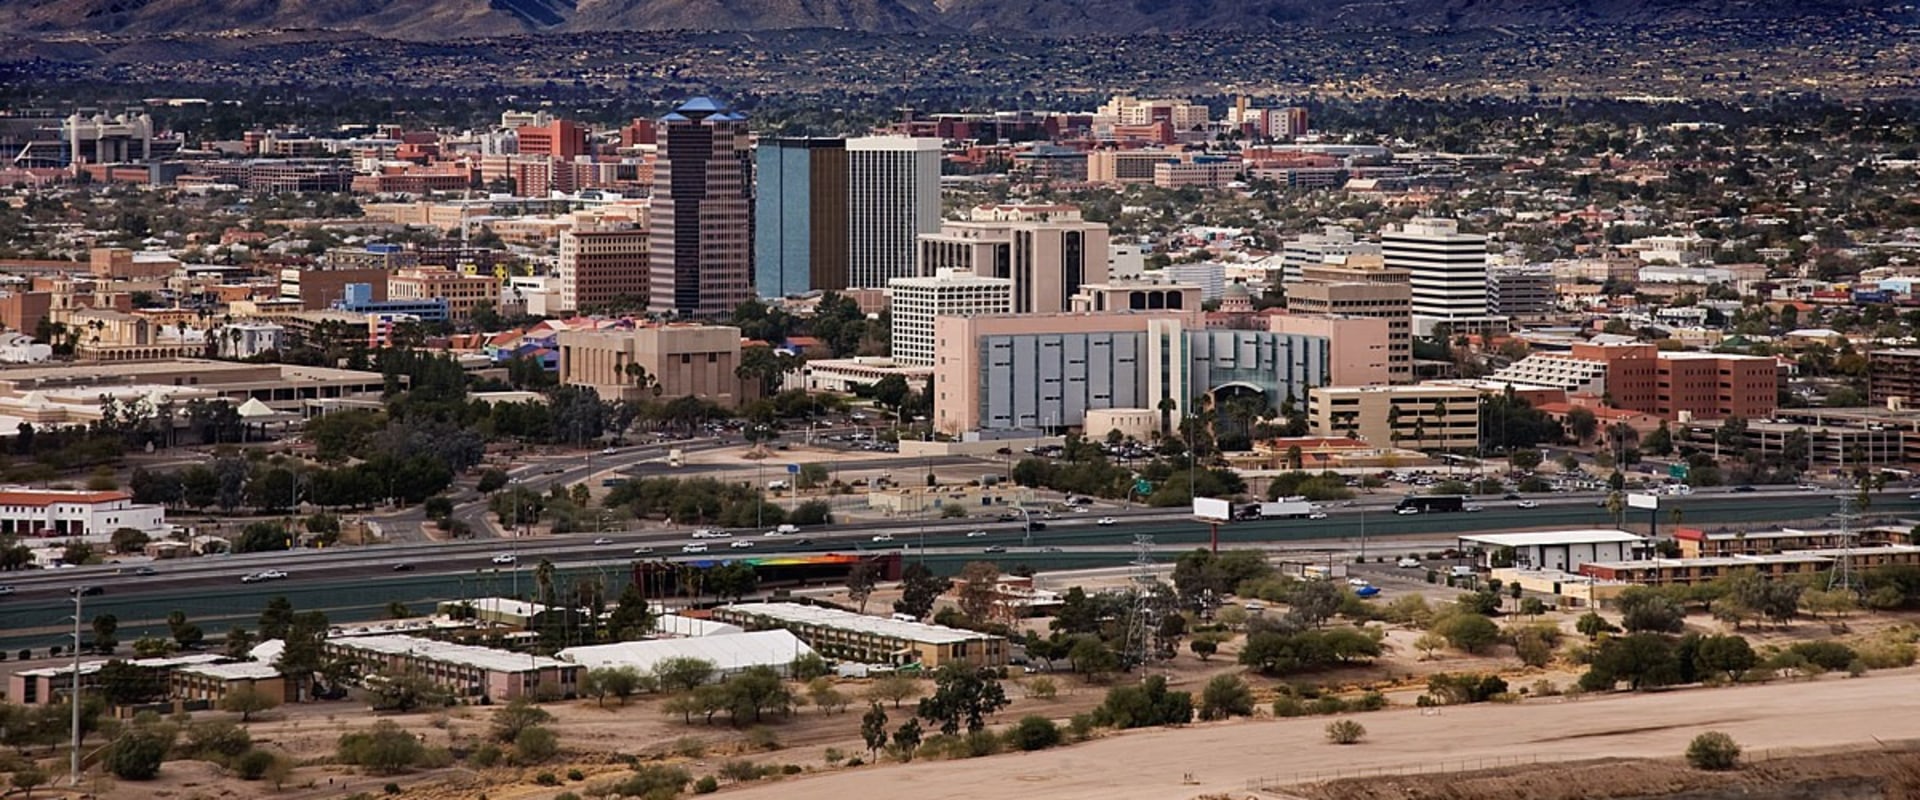 Tucson vs Scottsdale: Which is the Best Place to Retire?